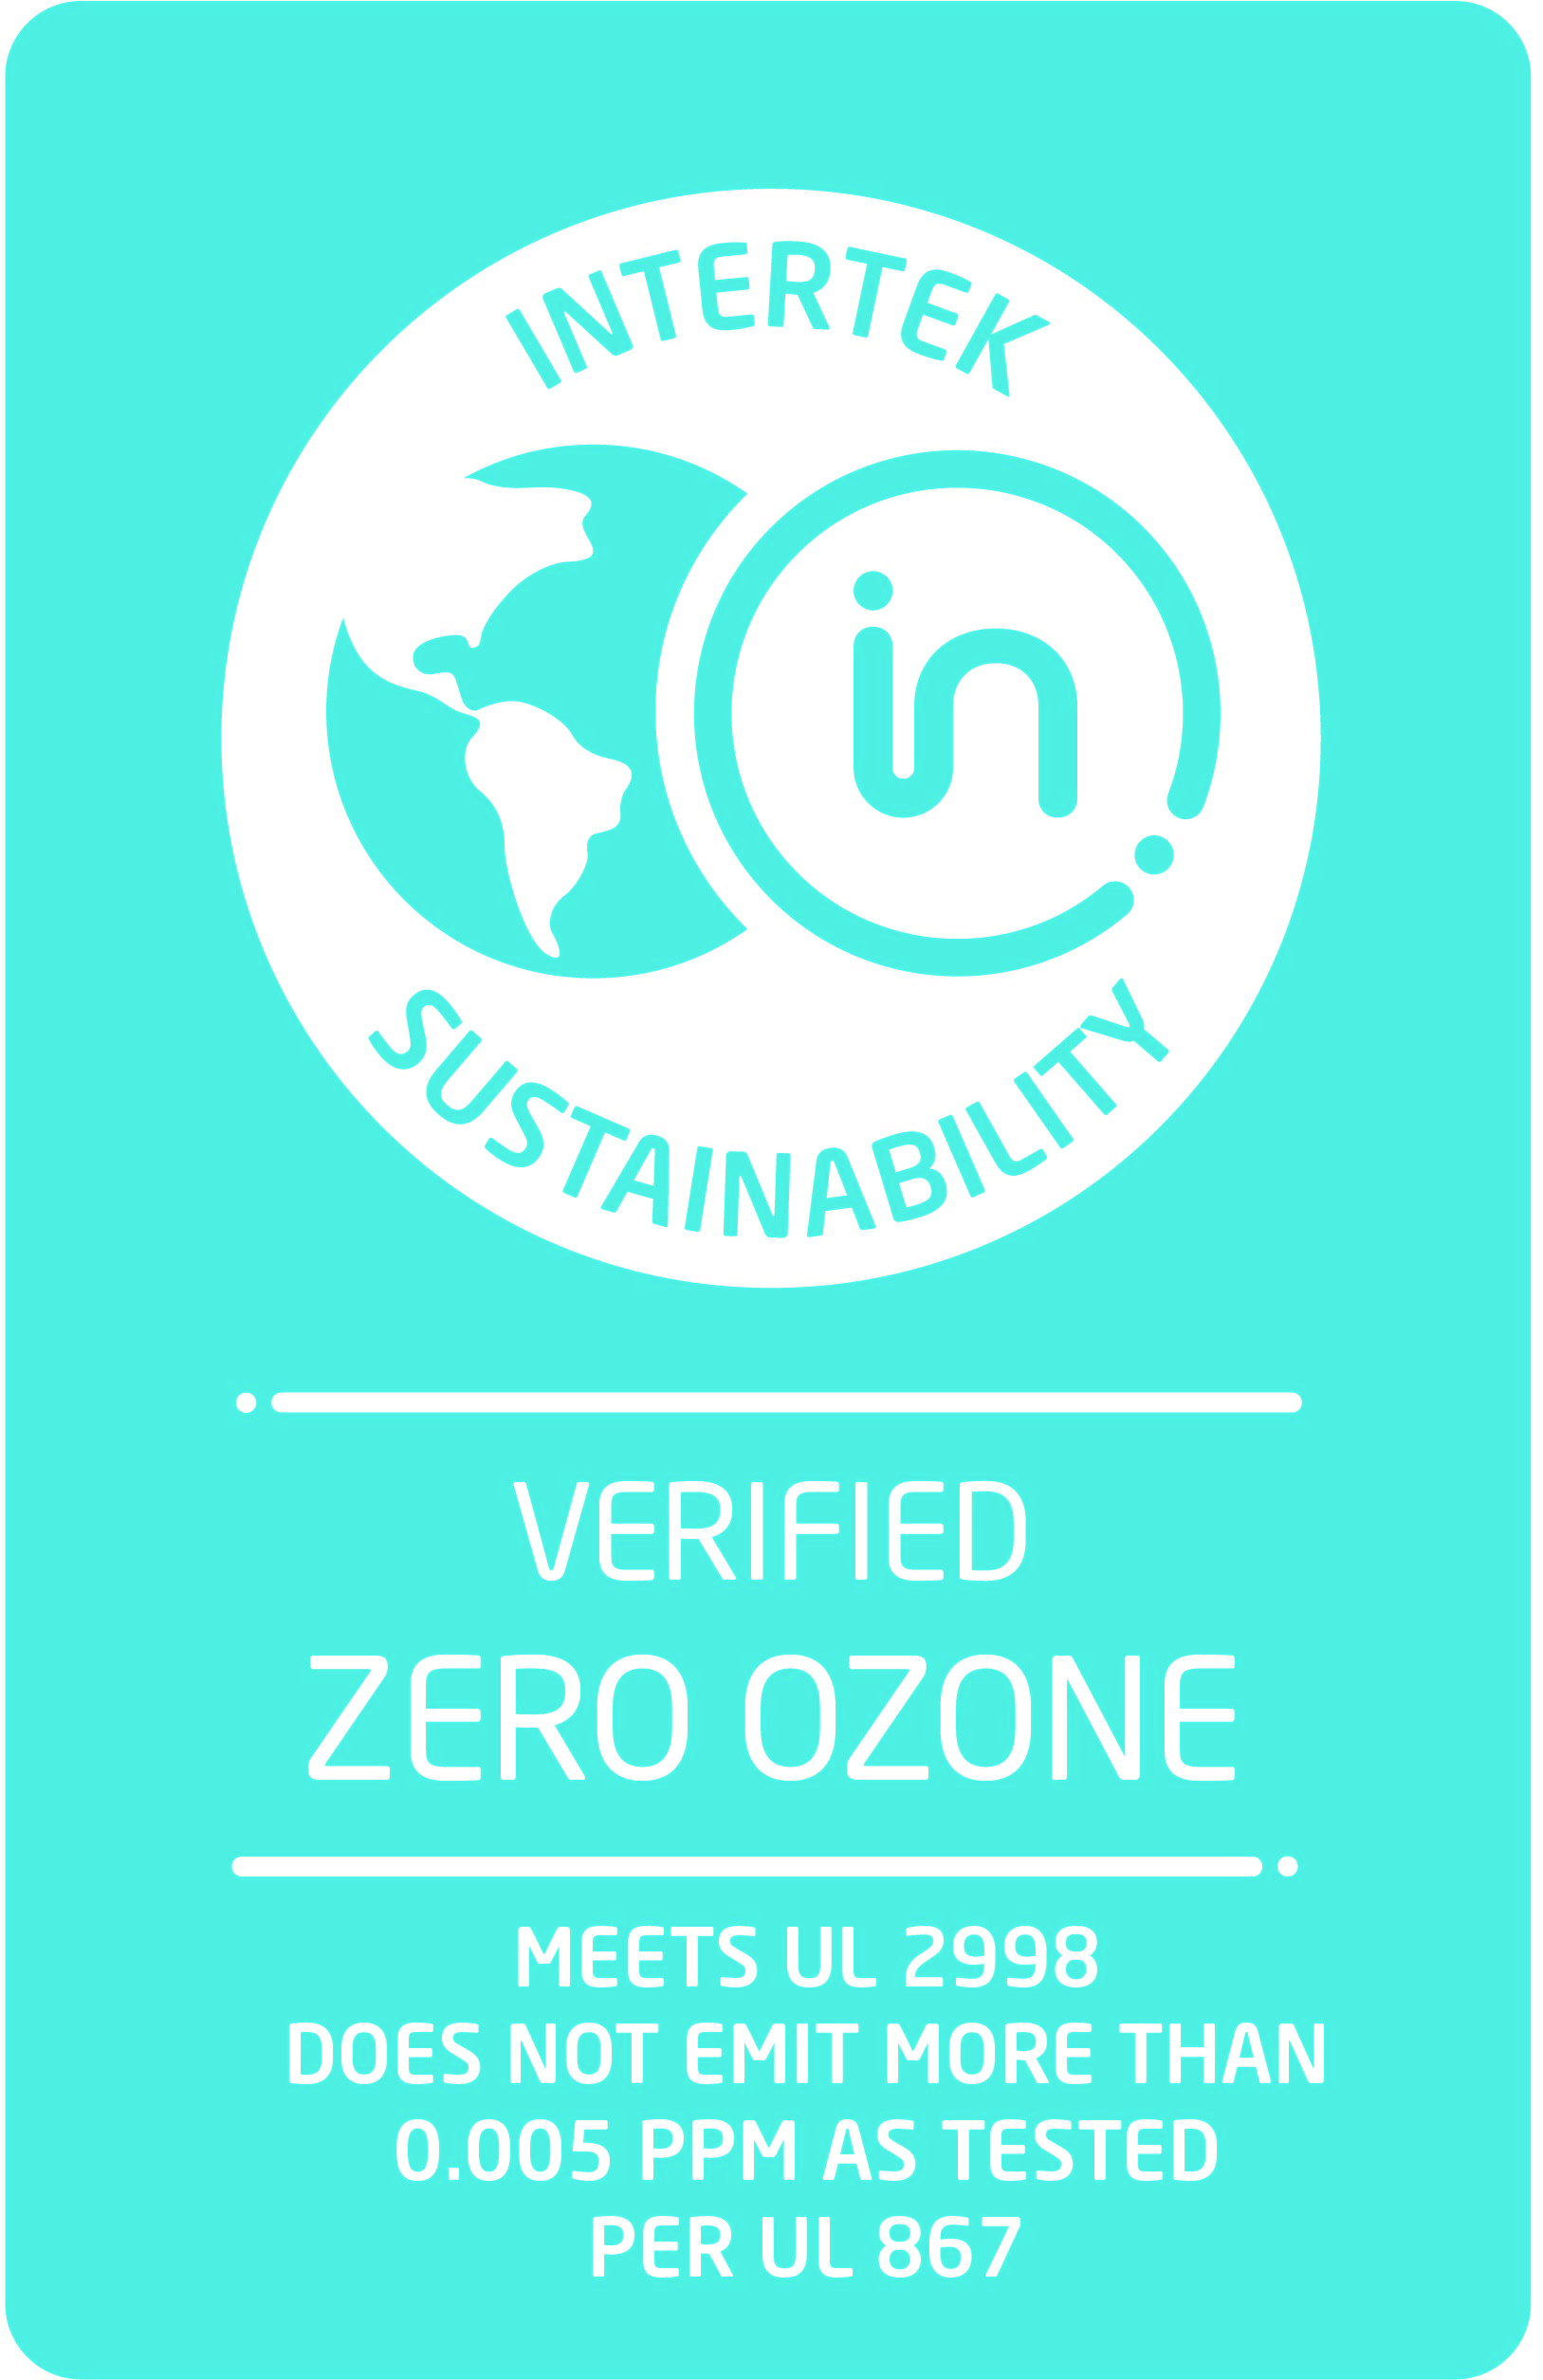 UL 2998 standard certification (Environmental Claim Validation Procedure (ECVP) for Zero Ozone Emissions from Air Cleaners) which is intended to validate that no harmful levels of ozone are produced.